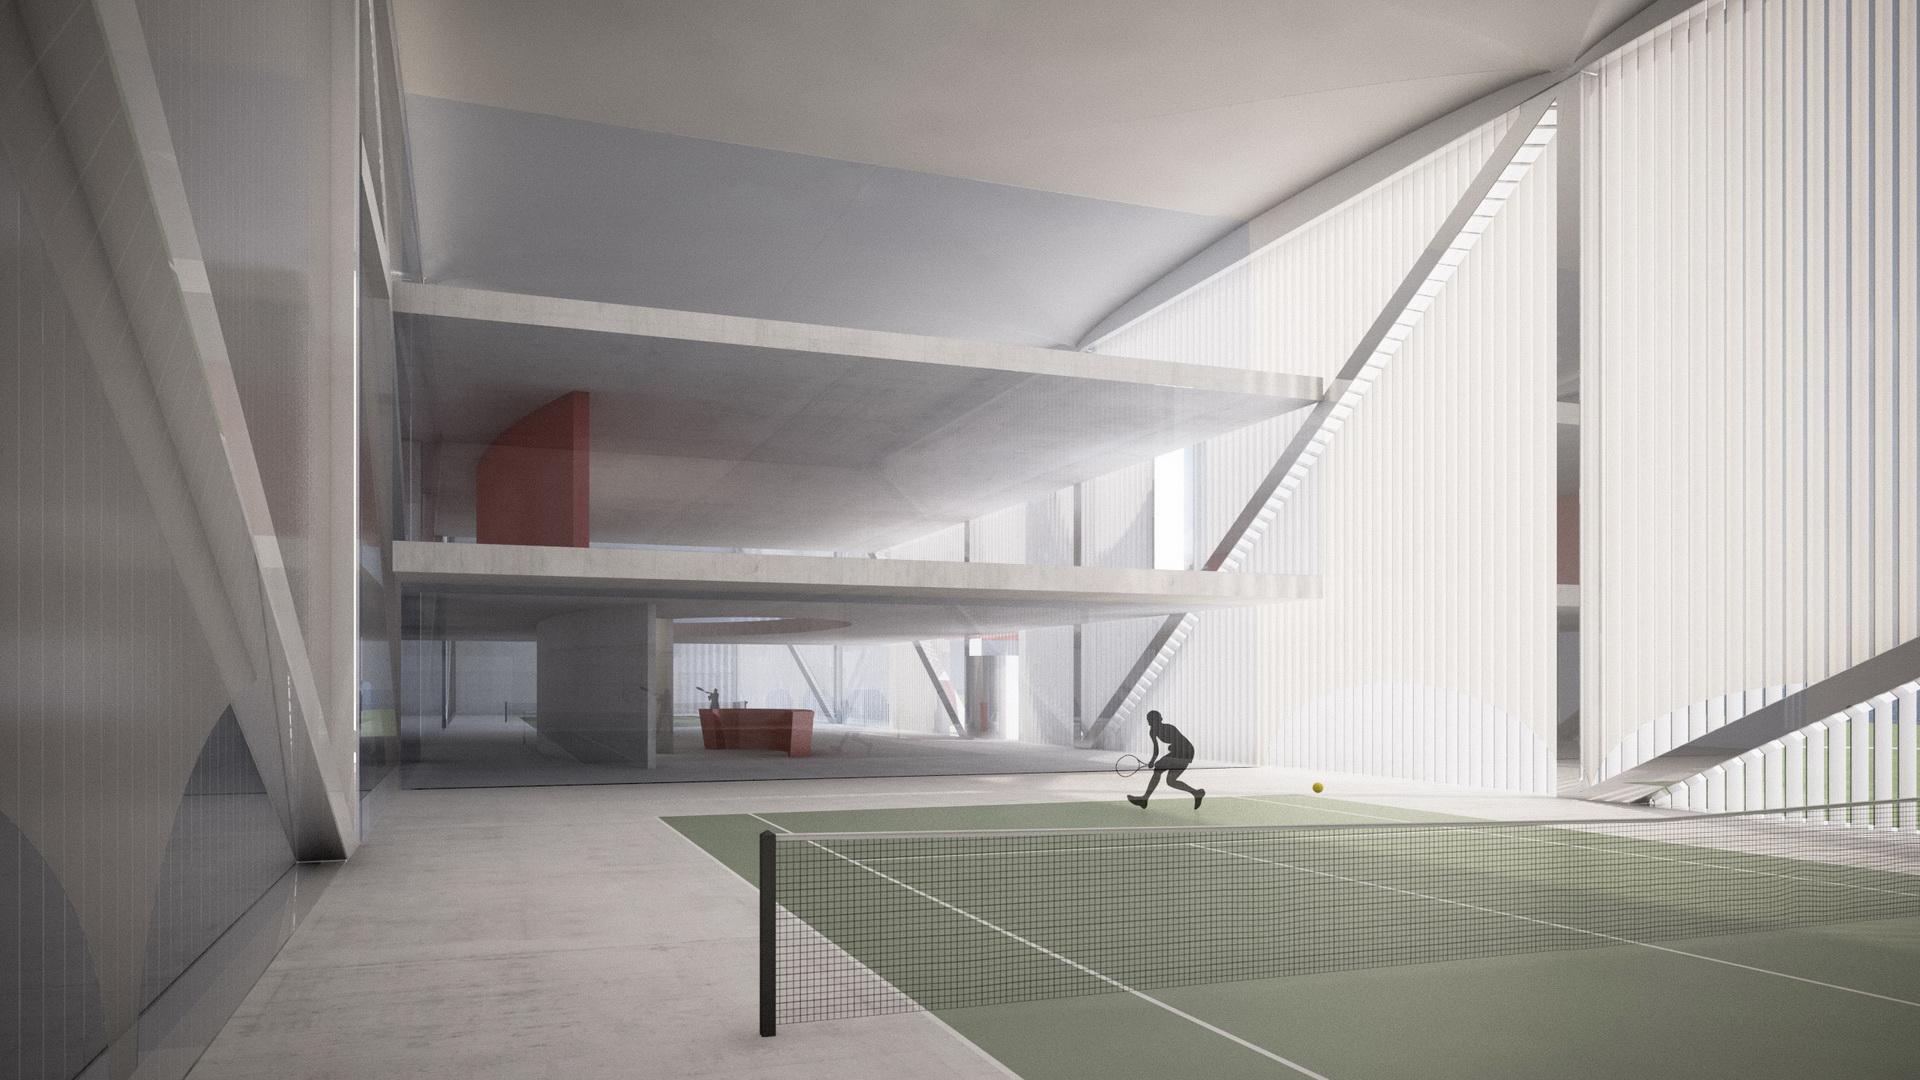 OHA - 708 BAXI TENNIS CLUB 14 - Office For Heuristic Architecture